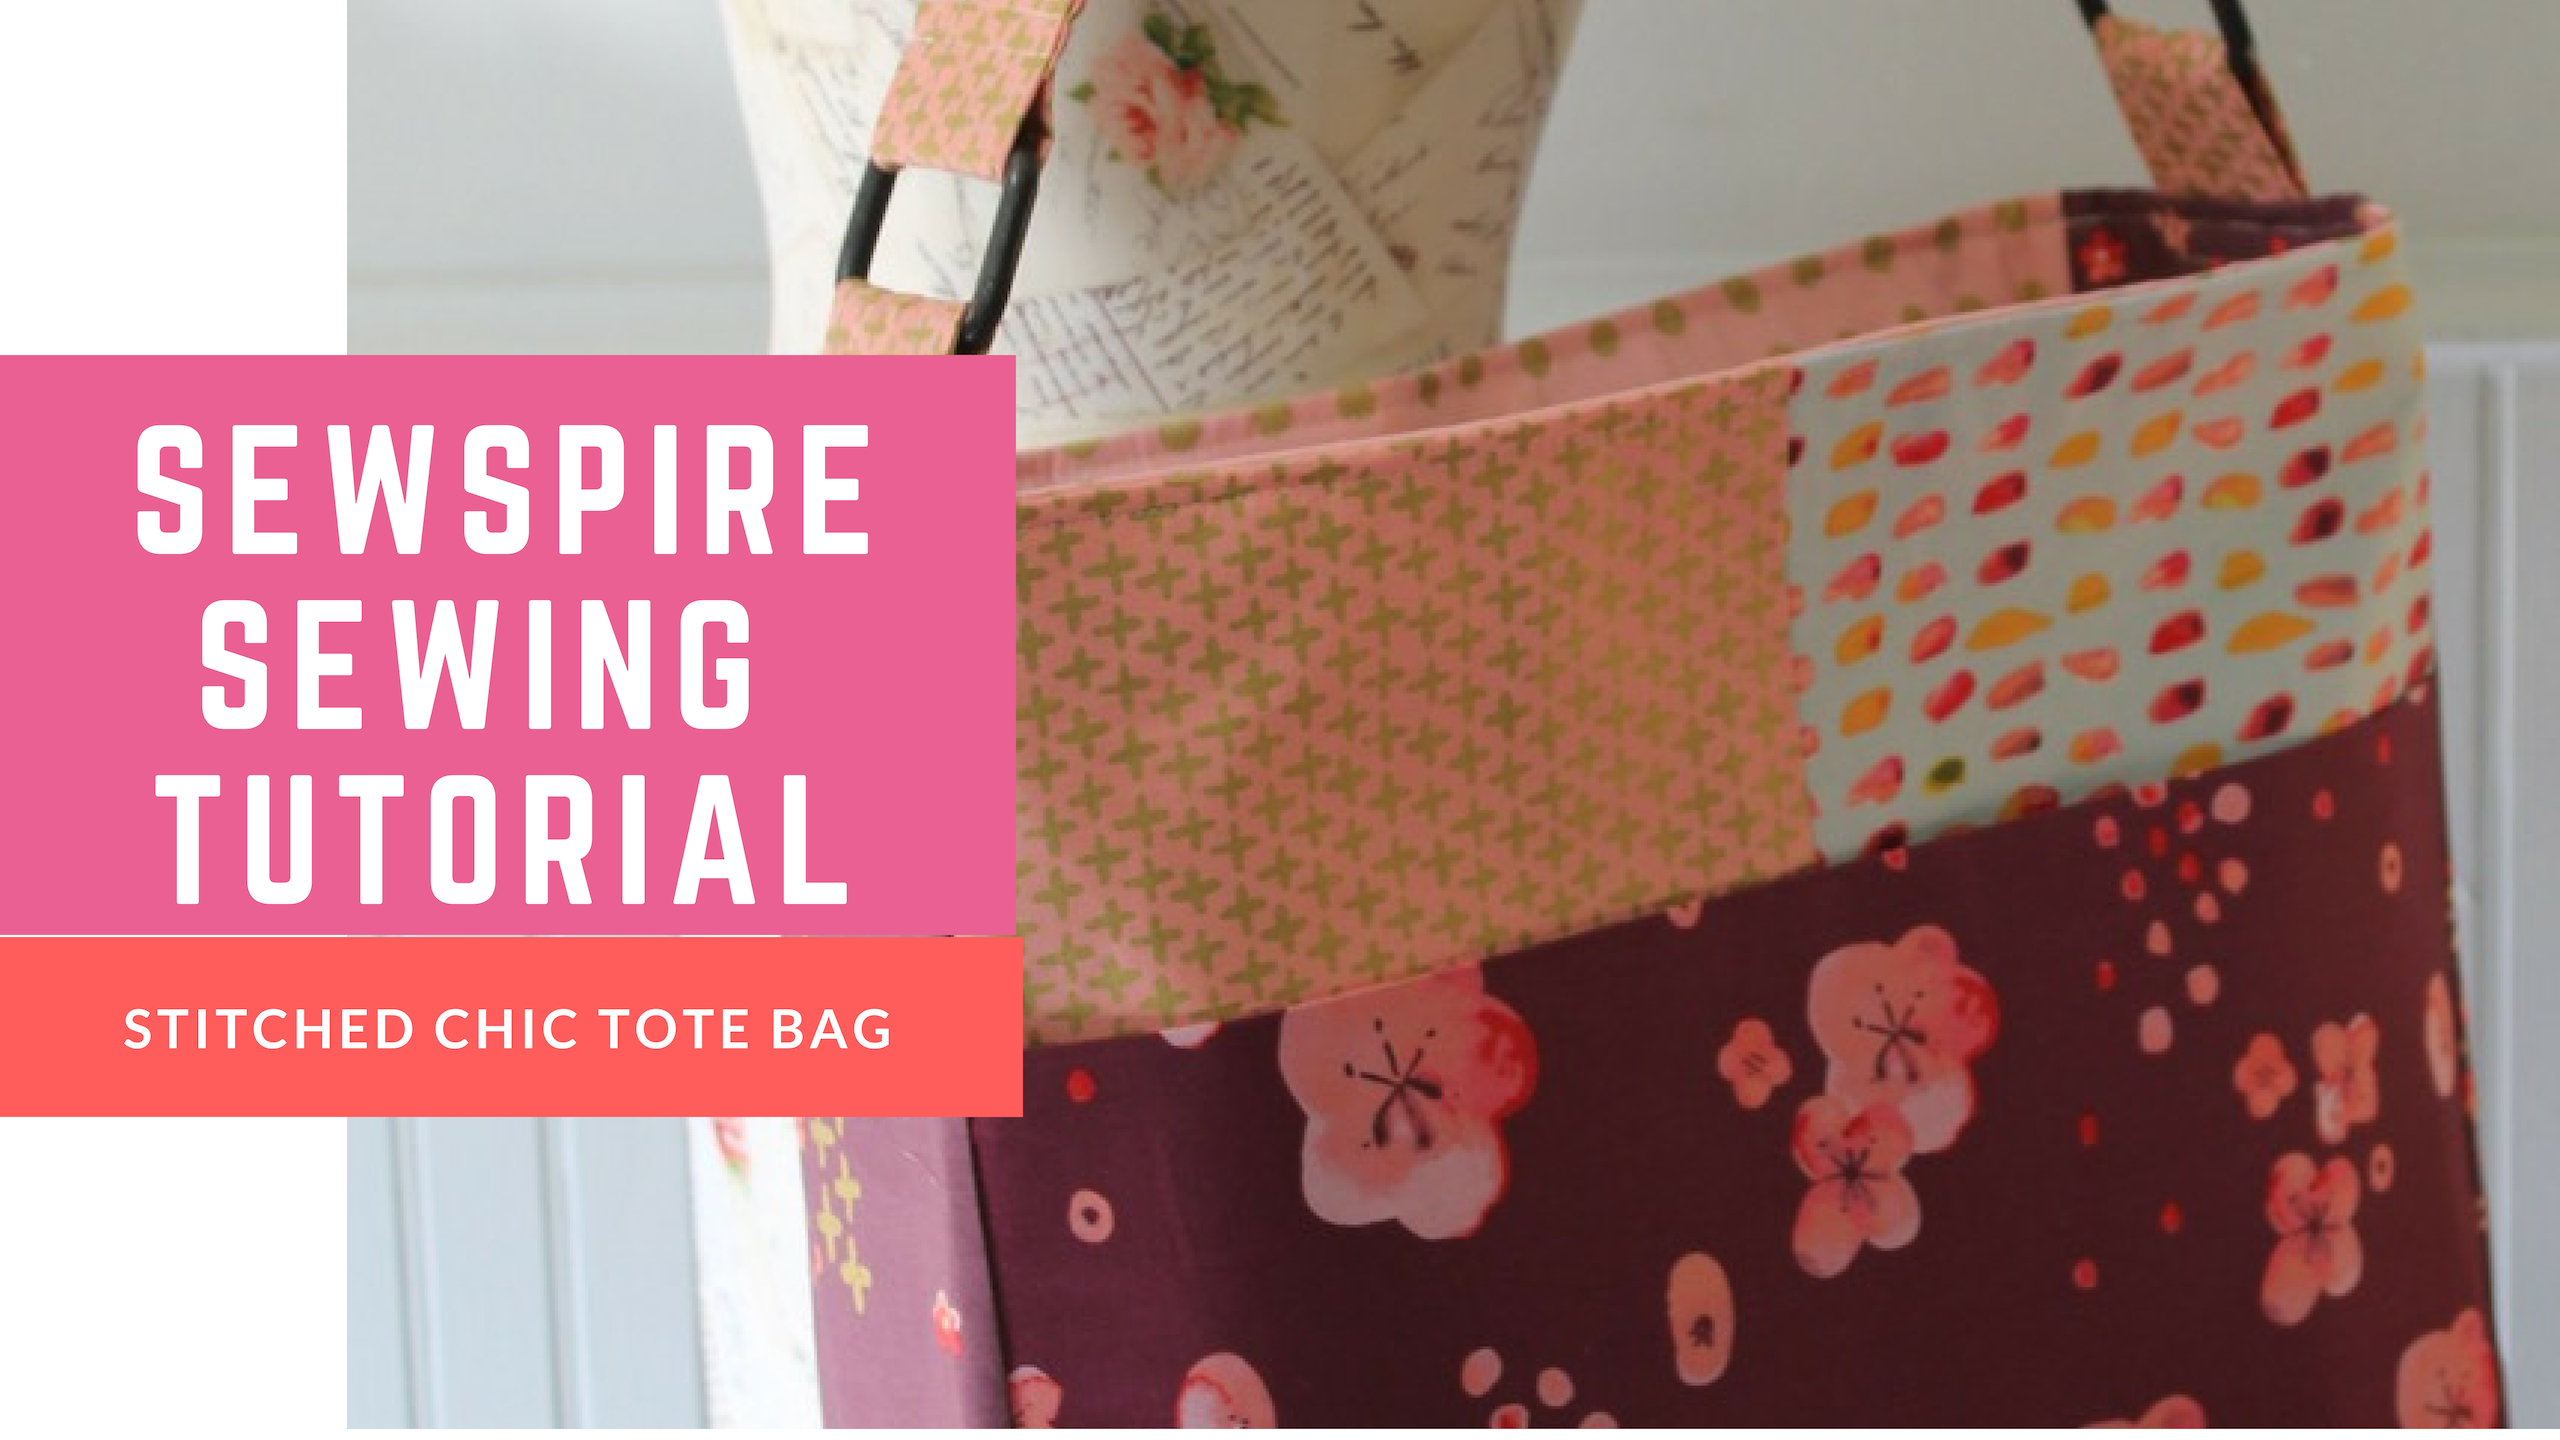 How to Sew a Stitched Chic Tote Bag with Zippered Tote Bag